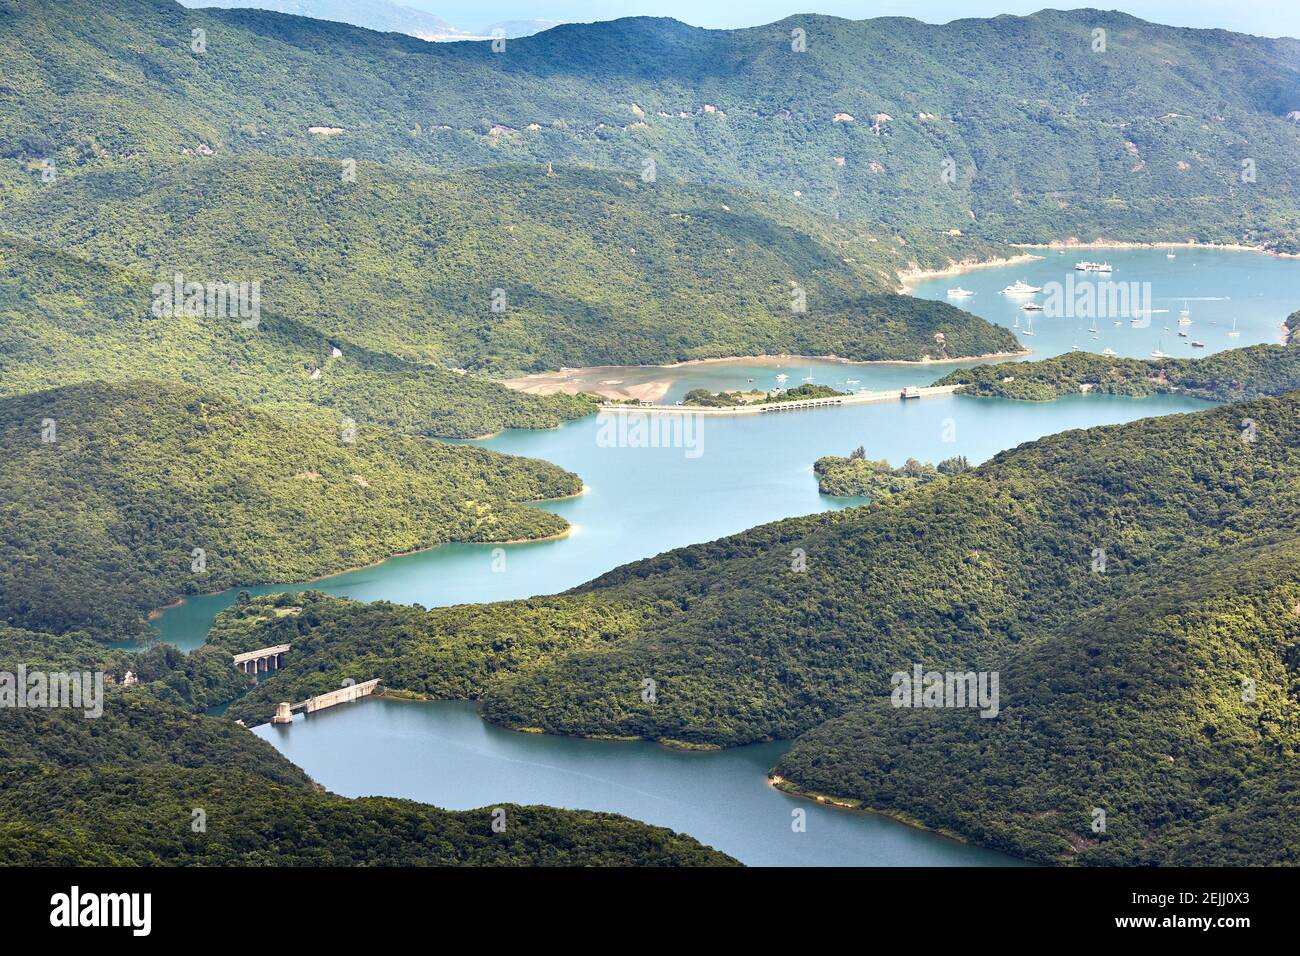 View over Tai Tam Intermediate reservoir (foreground) and Tai Tam Tuk Resrvoir (middle) from the Wilson Trail Stock Photo